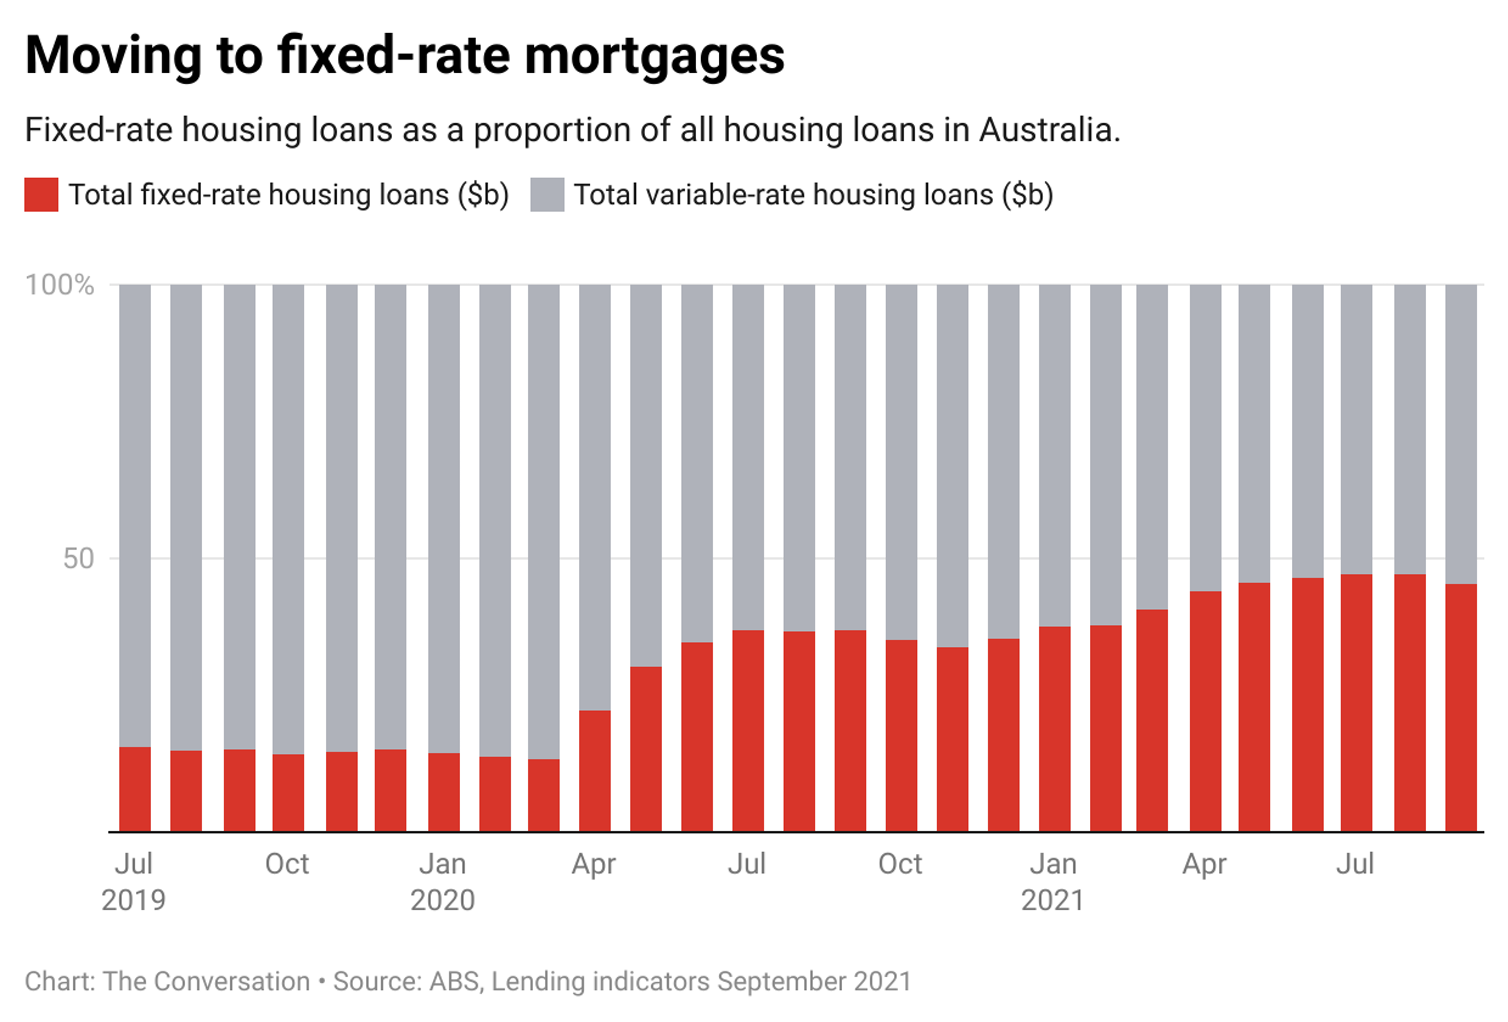 A grey and red column graph shows the proportion of fixed rate housing loans of all housing loans in Australia